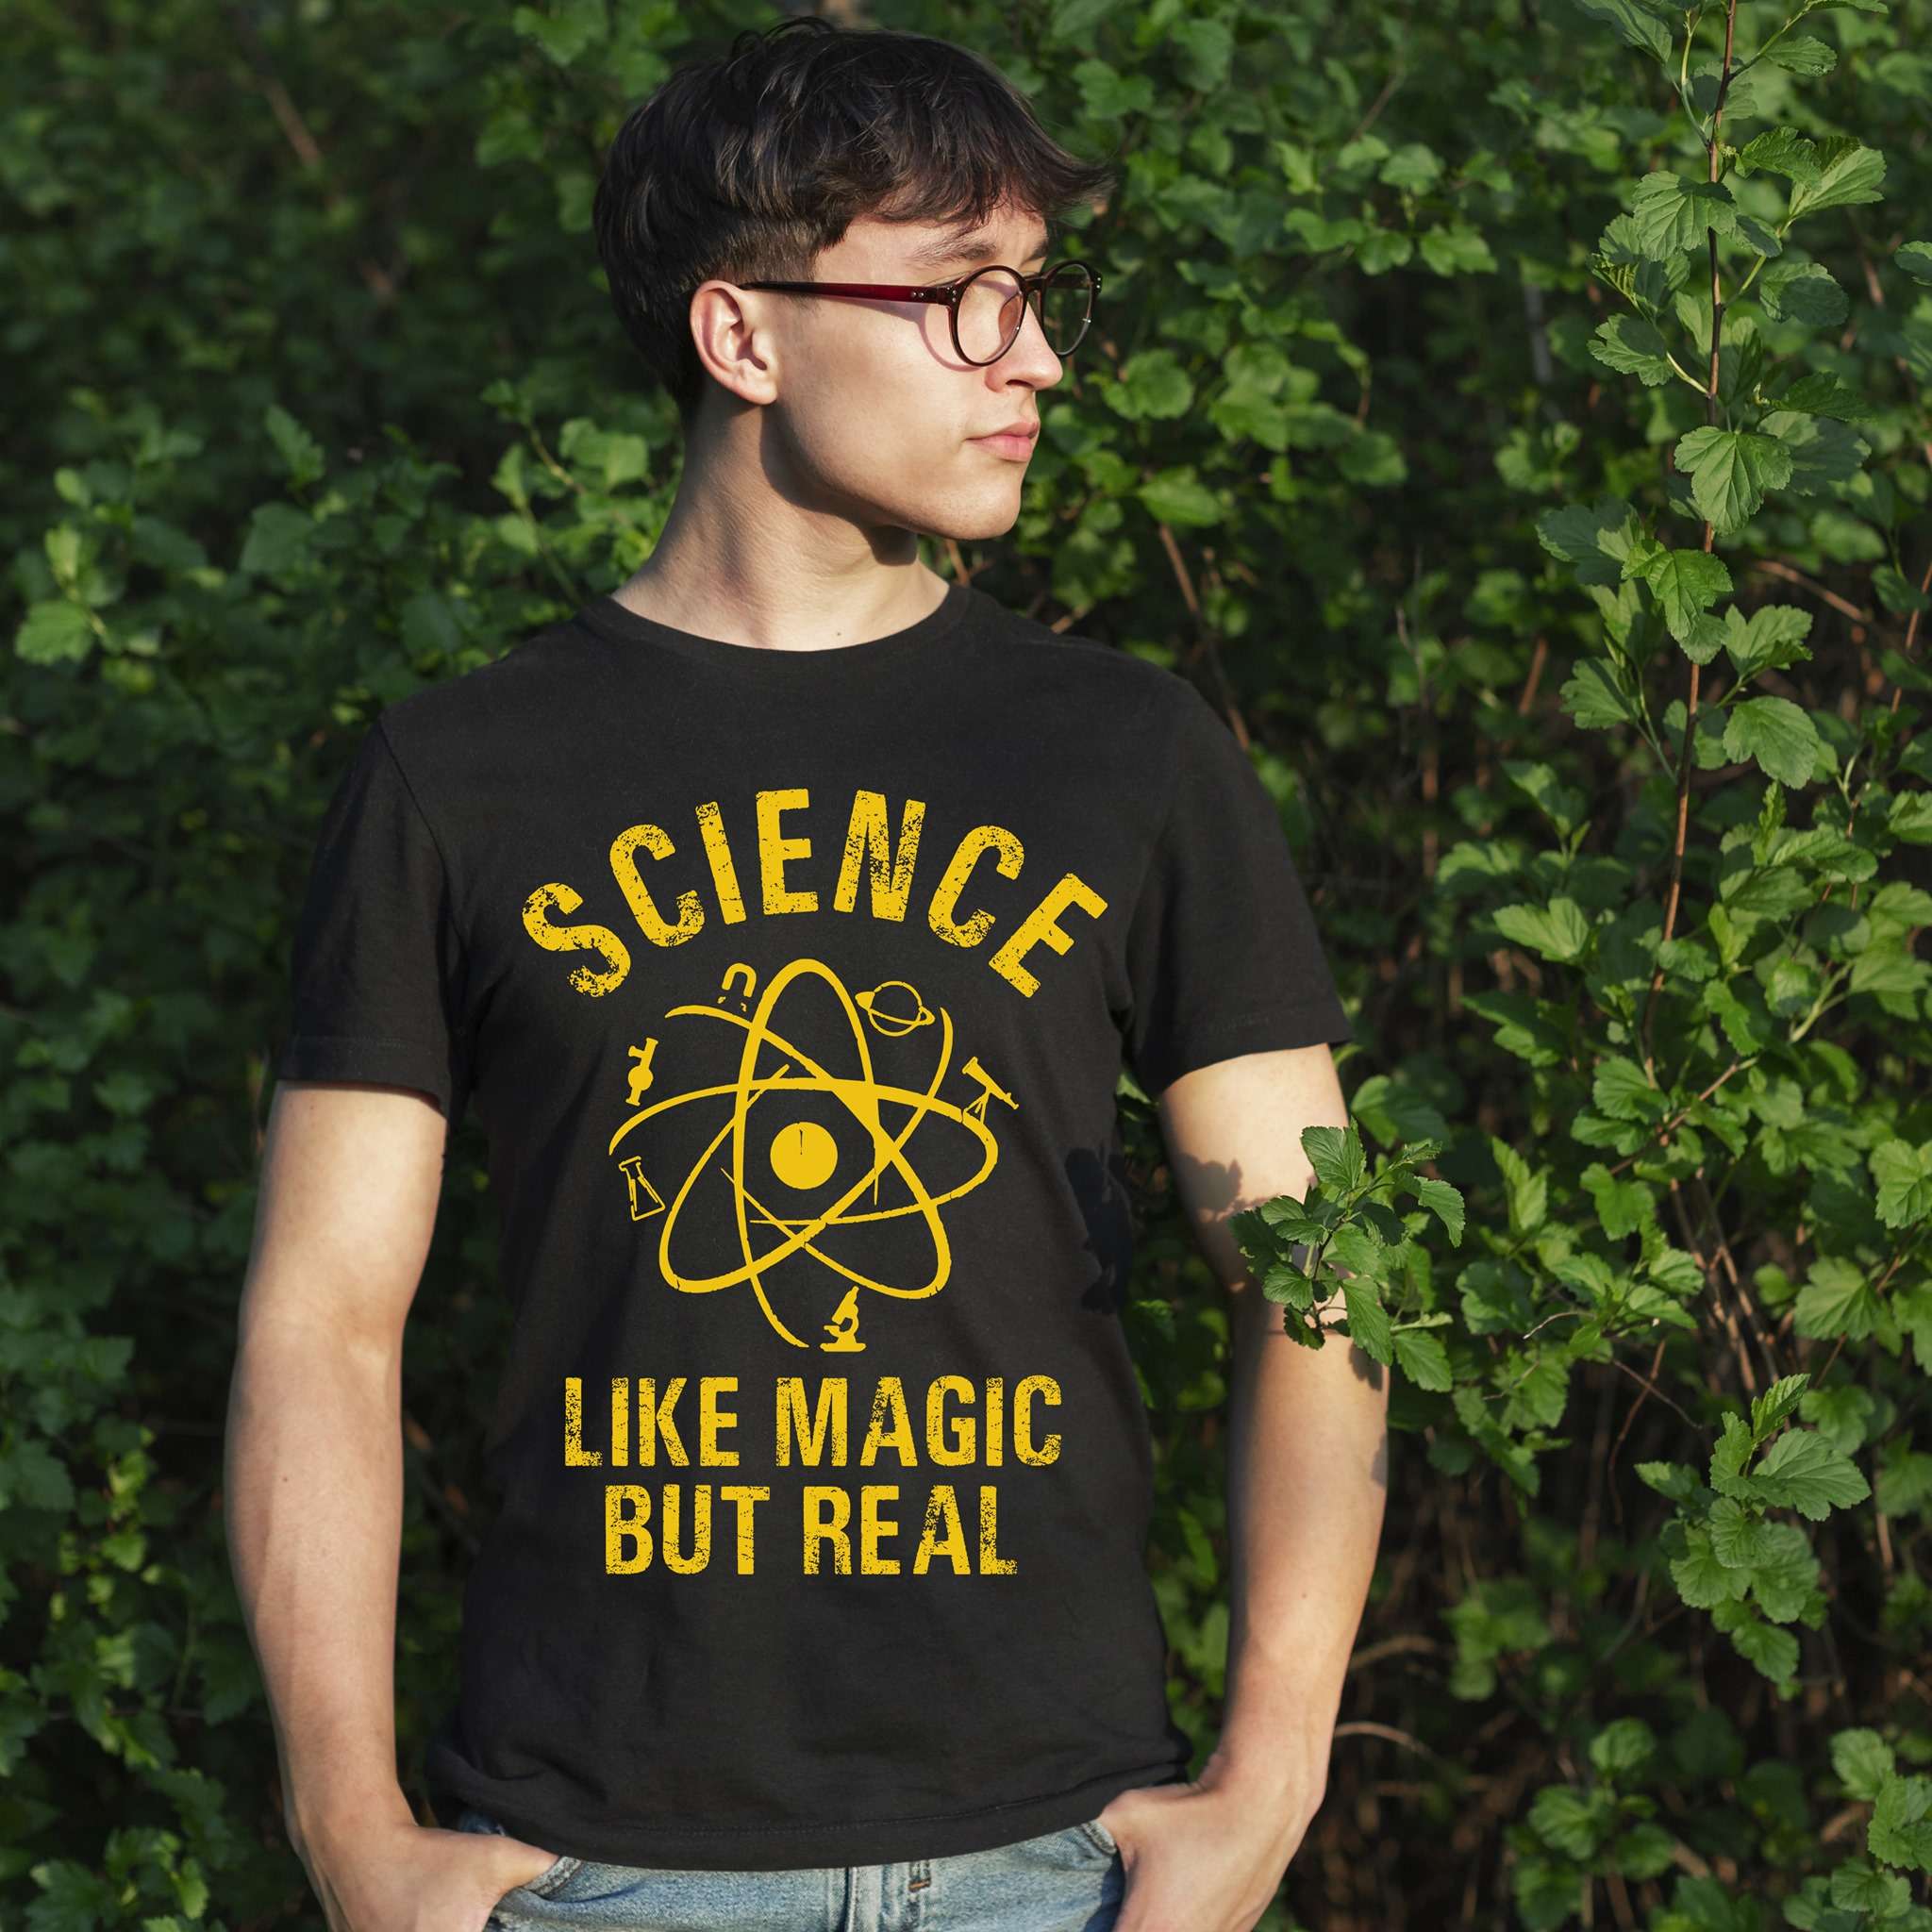 Science like magic but real - Science magic in real life, science human being knowledge